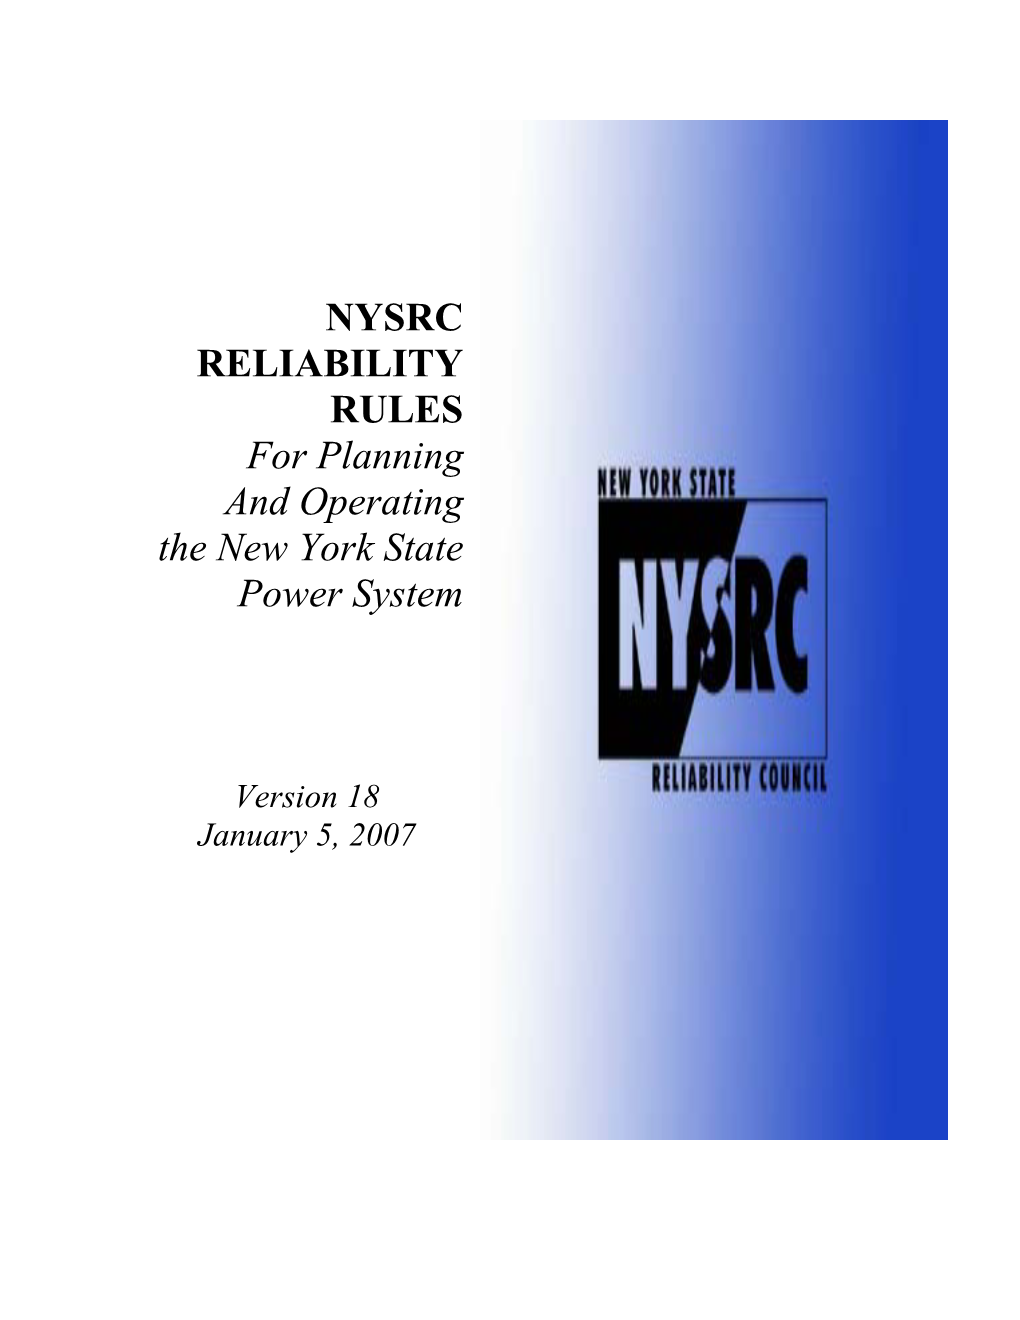 NYSRC RELIABILITY RULES for Planning and Operating the New York State Power System